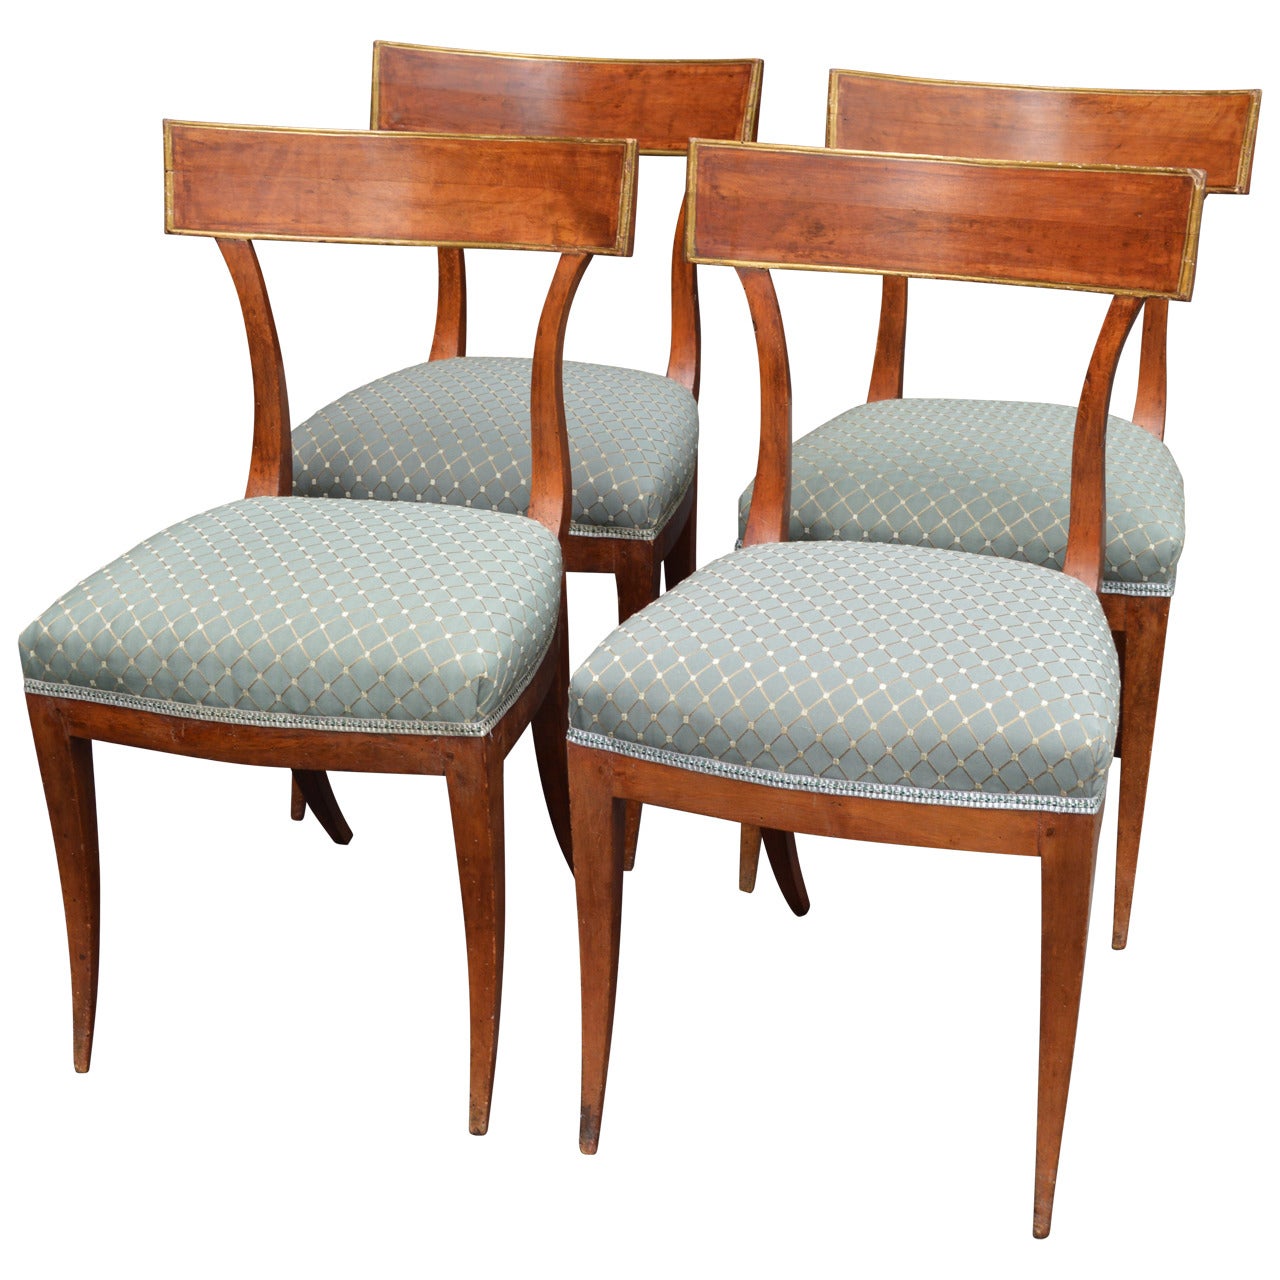 Set of Italian Directoire Curved Back Walnut Chairs